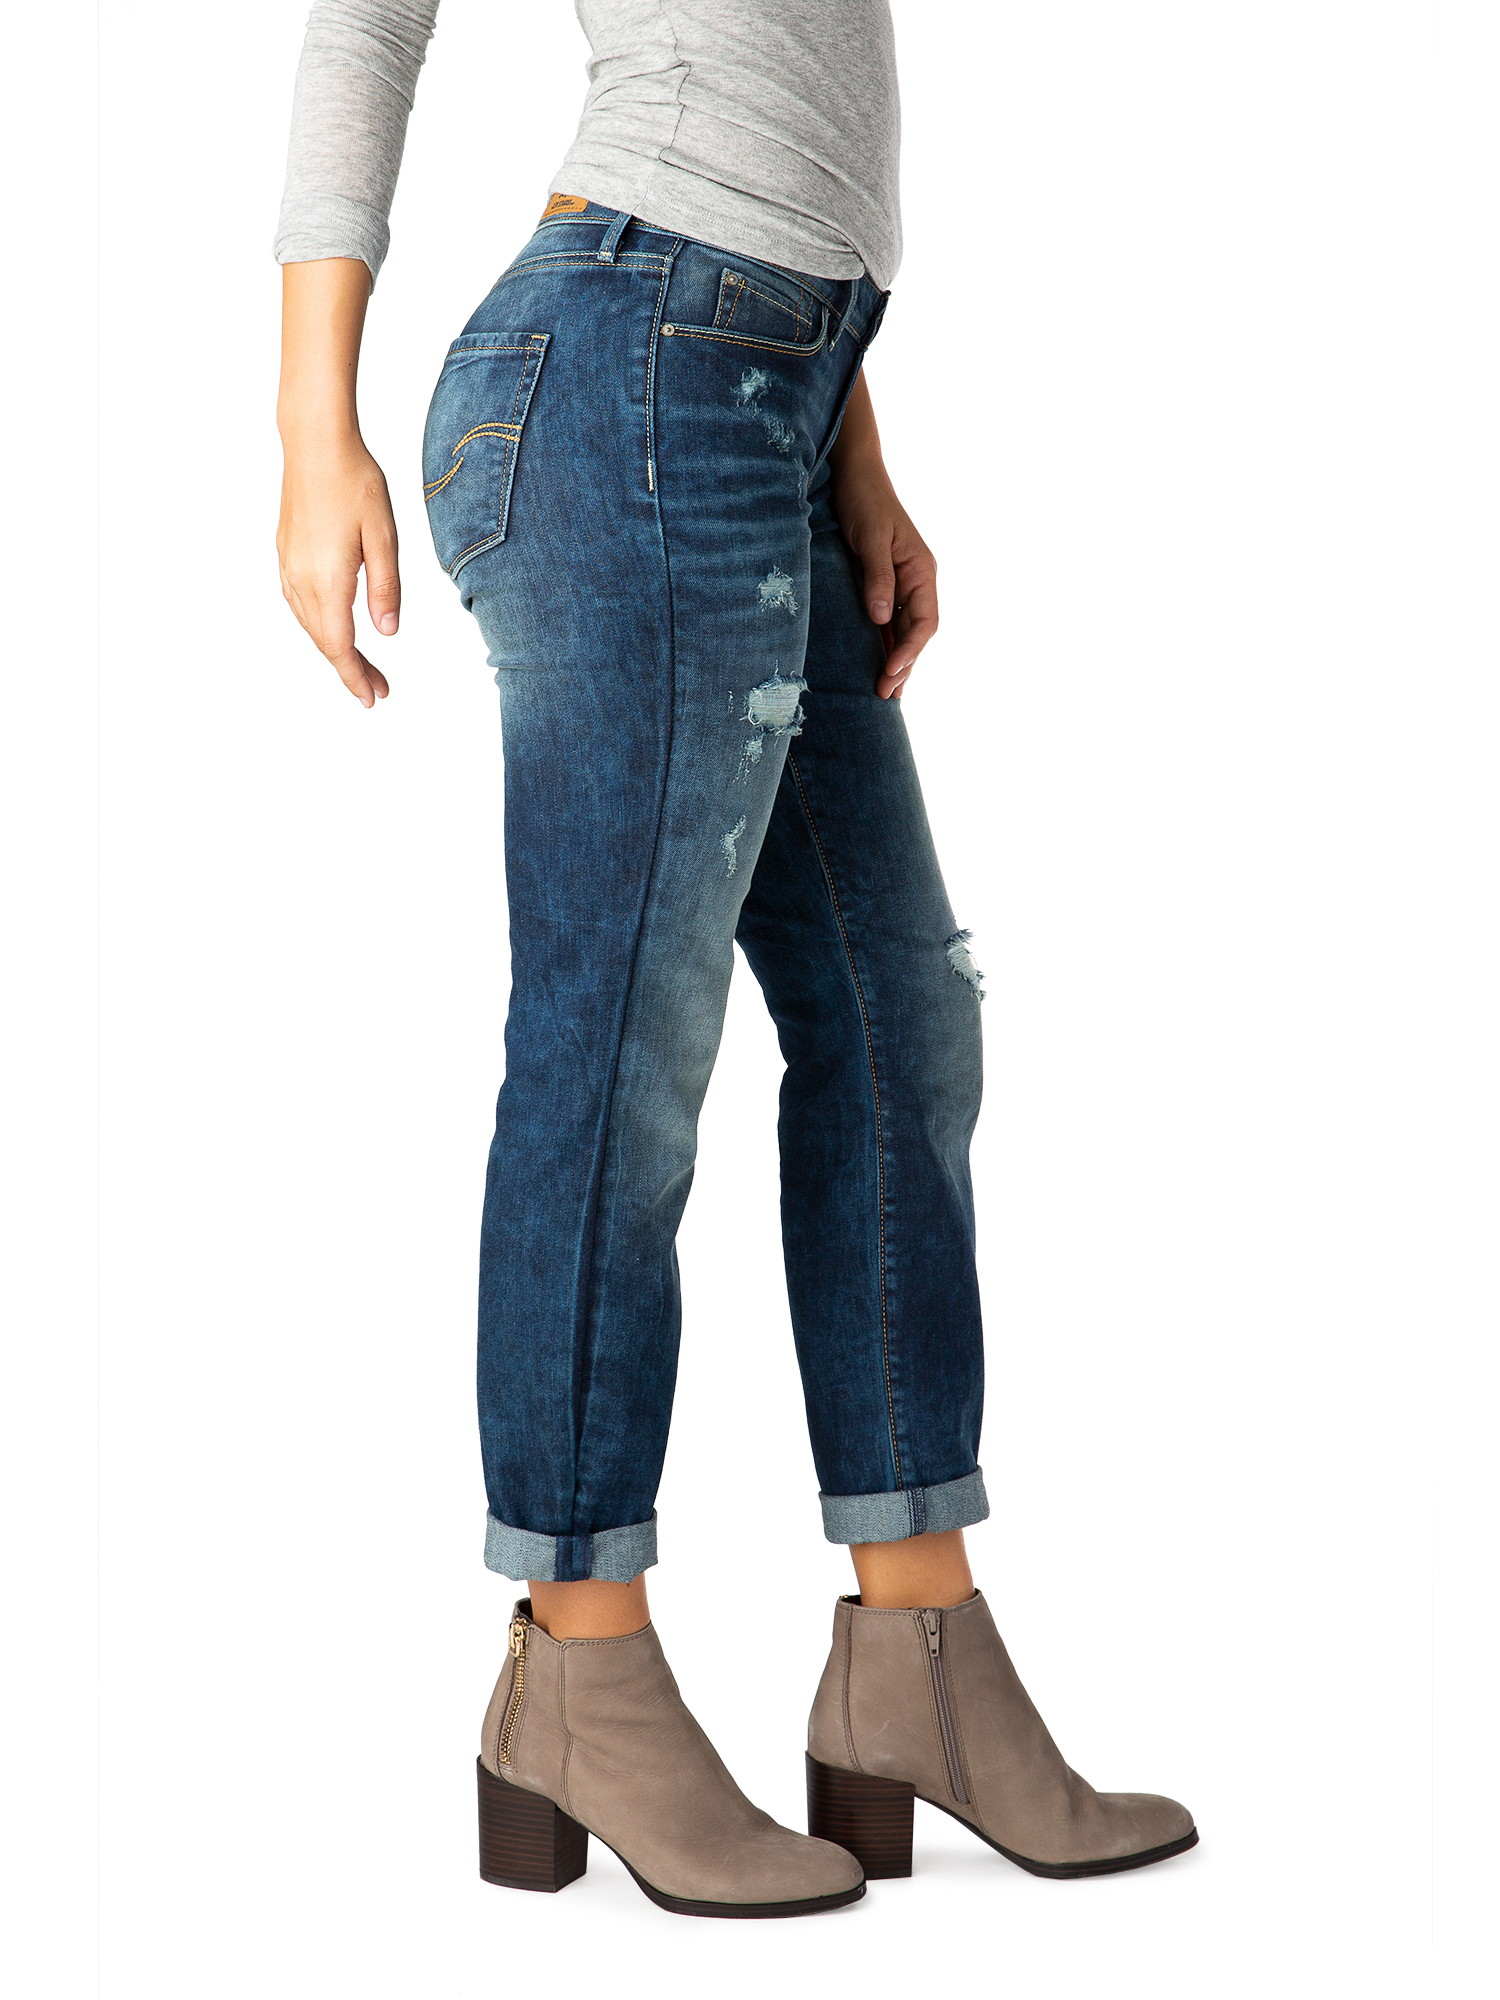 Signature by Levi Strauss & Co. Women's Modern Slim Cuffed Jeans - image 4 of 4